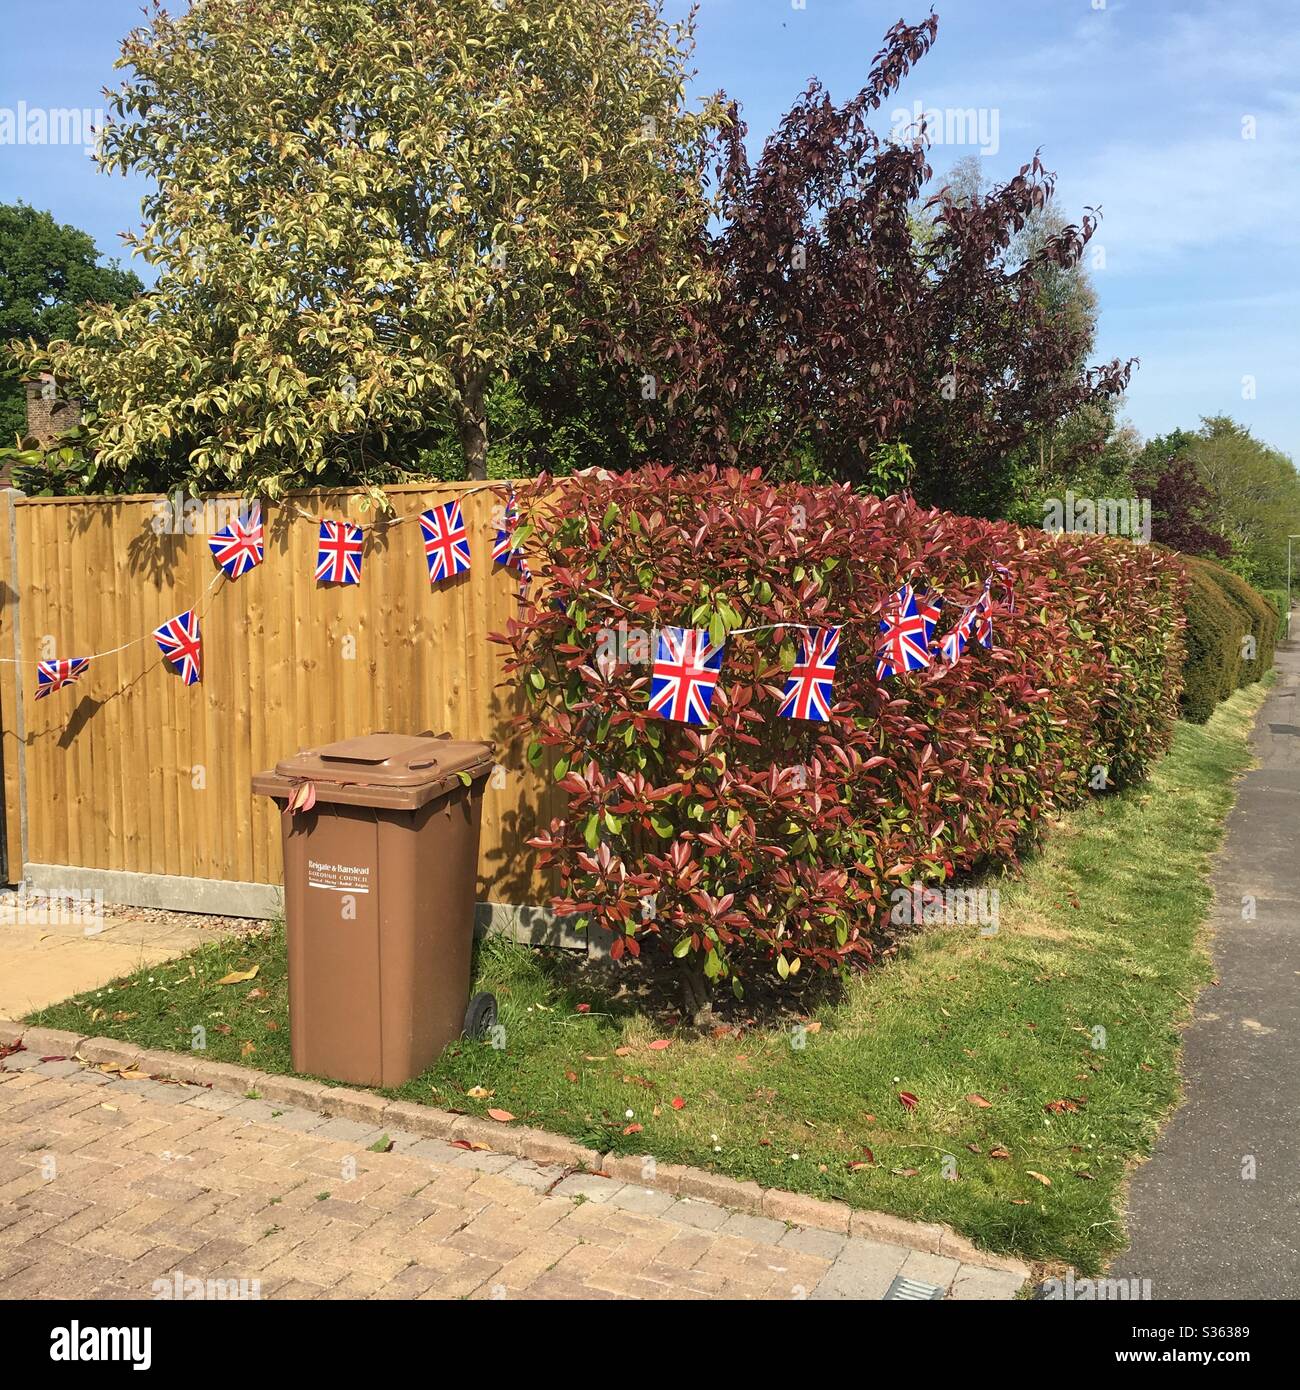 VE Day on bin day - VE Day celebrations with a hedge and fence decorated with Union Jack flag bunting Stock Photo